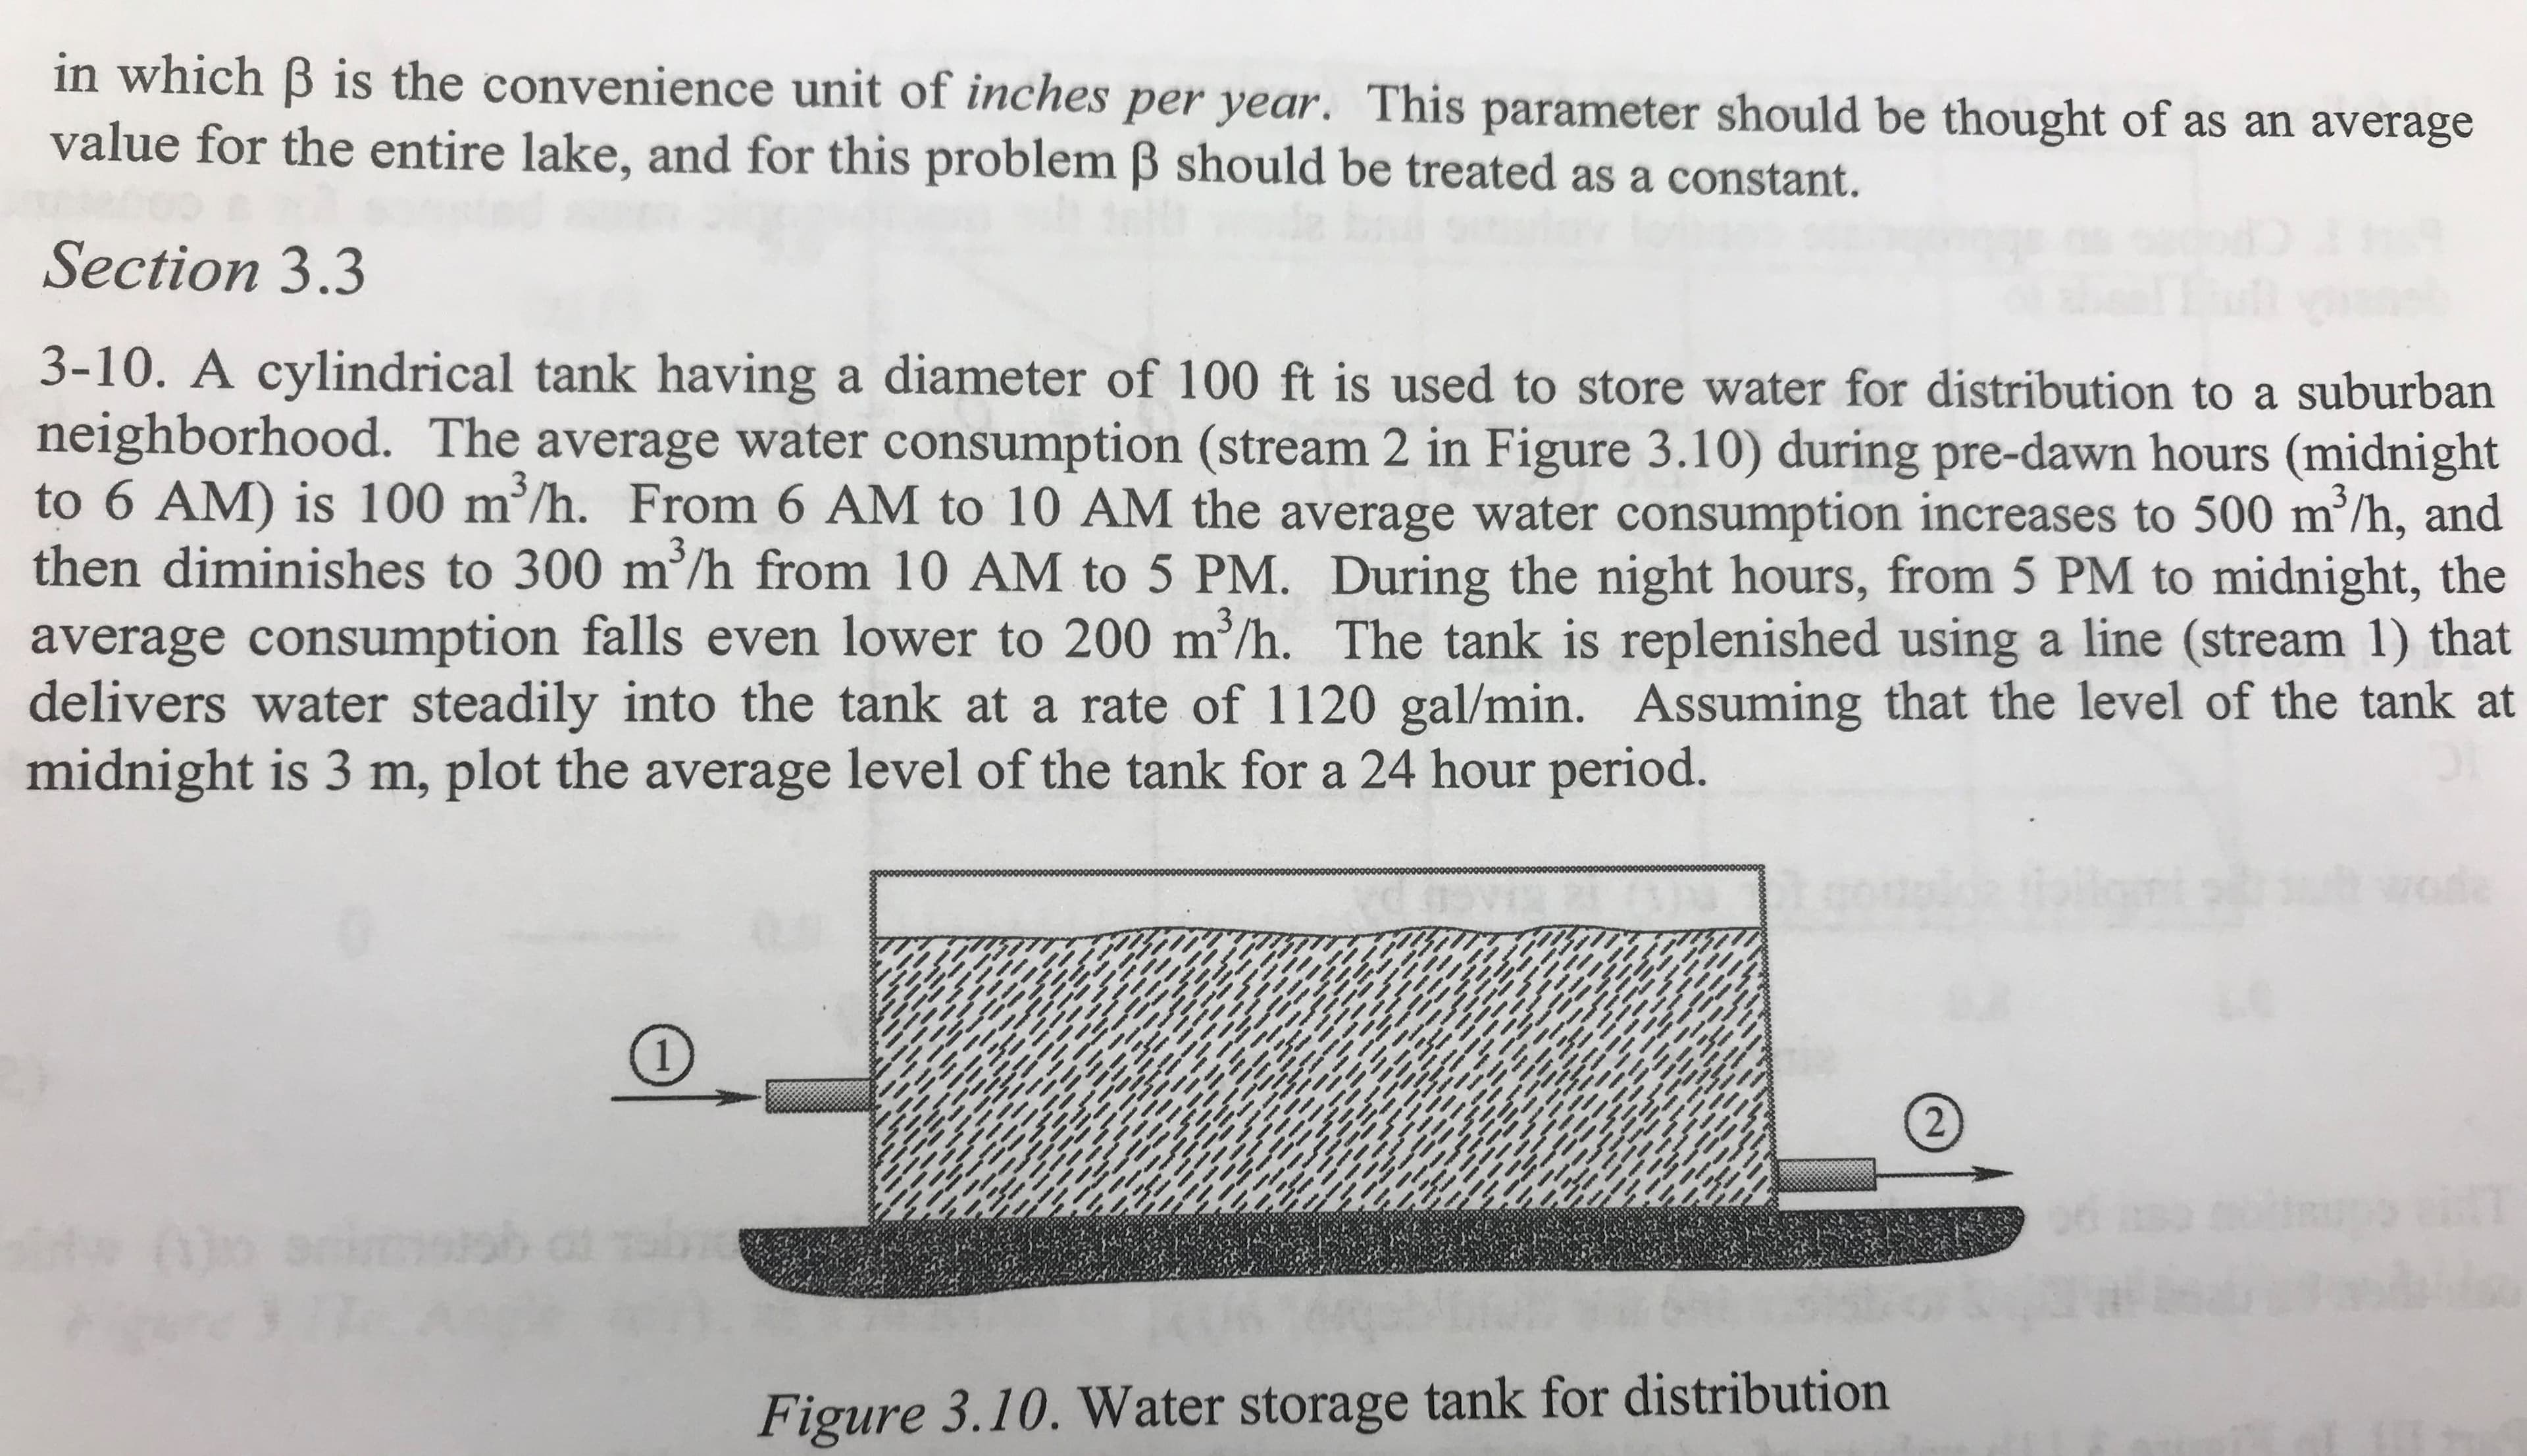 in which B is the convenience unit of inches per year. This parameter should be thought of as an average
value for the entire lake, and for this problem B should be treated as a constant.
Section 3.3
3-10. A cylindrical tank having a diameter of 100 ft is used to store water for distribution to a suburban
neighborhood. The average water consumption (stream 2 in Figure 3.10) during pre-dawn hours (midnight
to 6 AM) is 100 m'/h. From 6 AM to 10 AM the average water consumption increases to 500 m/h, and
then diminishes to 300 m'/h from 10 AM to 5 PM. During the night hours, from 5 PM to midnight, the
average consumption falls even lower to 200 m /h. The tank is replenished using a line (stream 1) that
delivers water steadily into the tank at a rate of 1120 gal/min. Assuming that the level of the tank at
midnight is 3 m, plot the average level of the tank for a 24 hour period.
3
3
e:
ade
1
www me
www
w
0) S
risb c
2
H7
Figure 3.10. Water storage tank for distribution
M
wwwwa
de
www
s d
